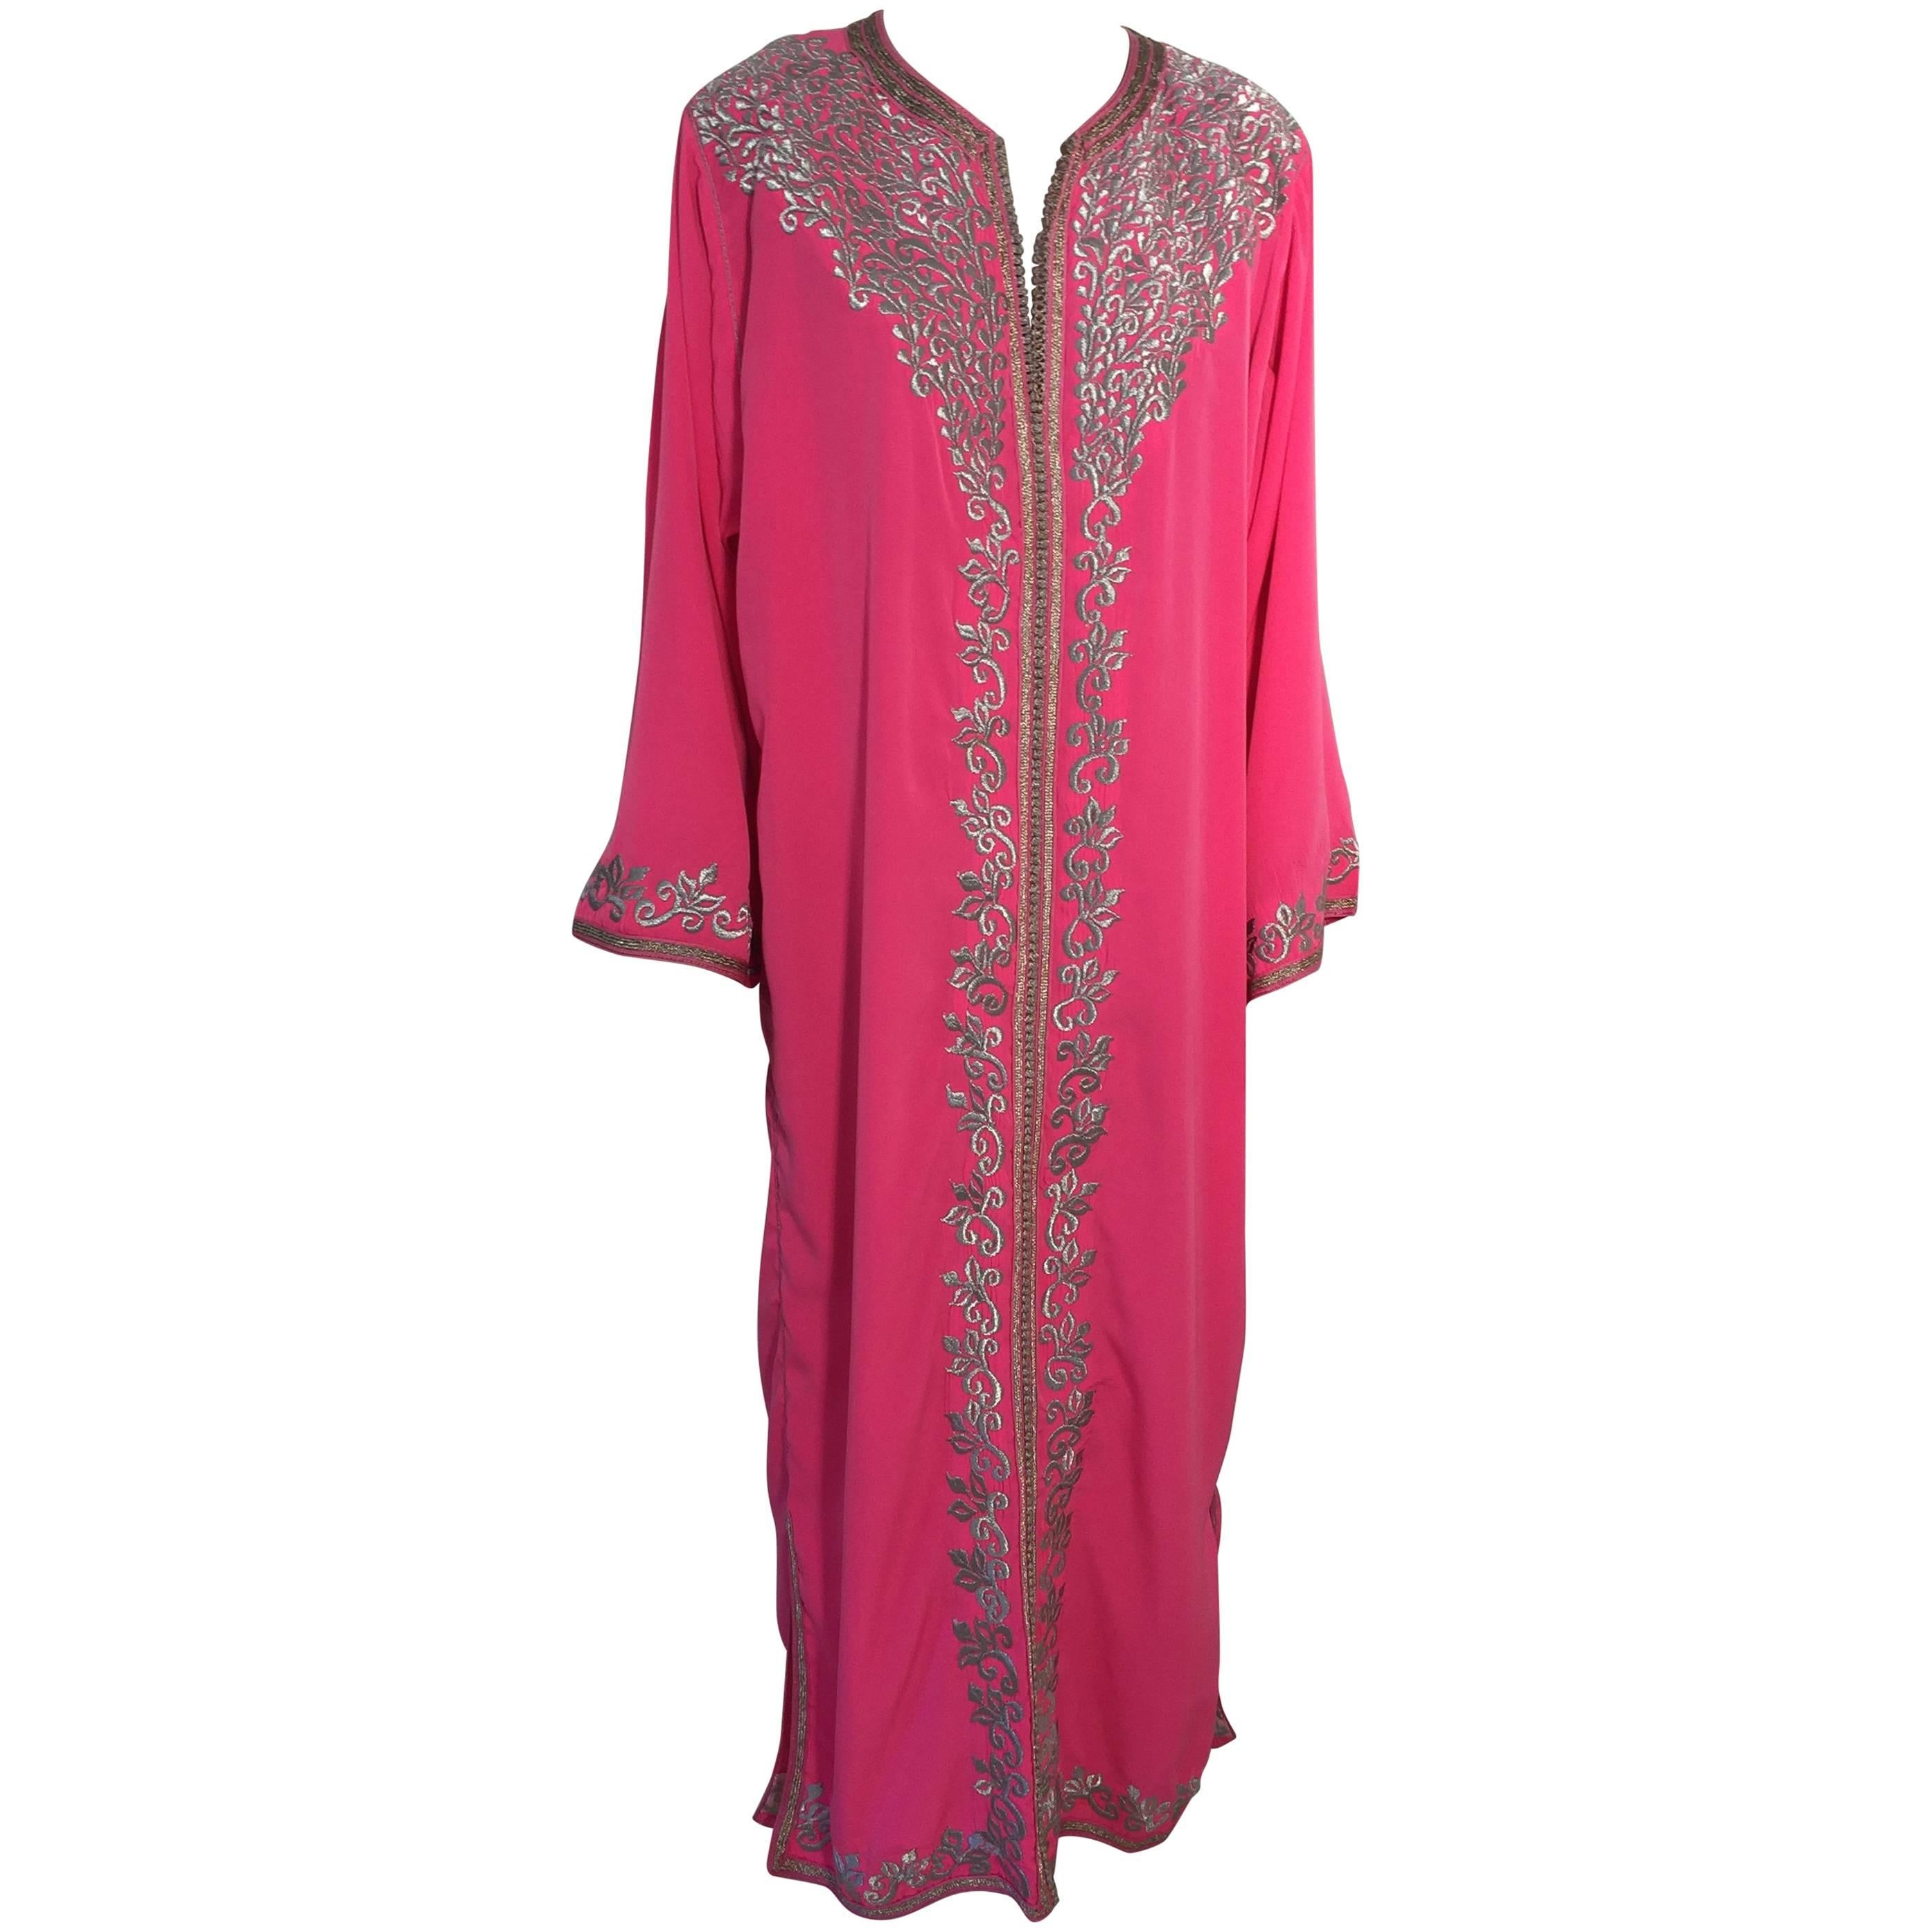 Moroccan Hot Pink Caftan with Silver Embroideries Maxi Dress Kaftan Size L to XL